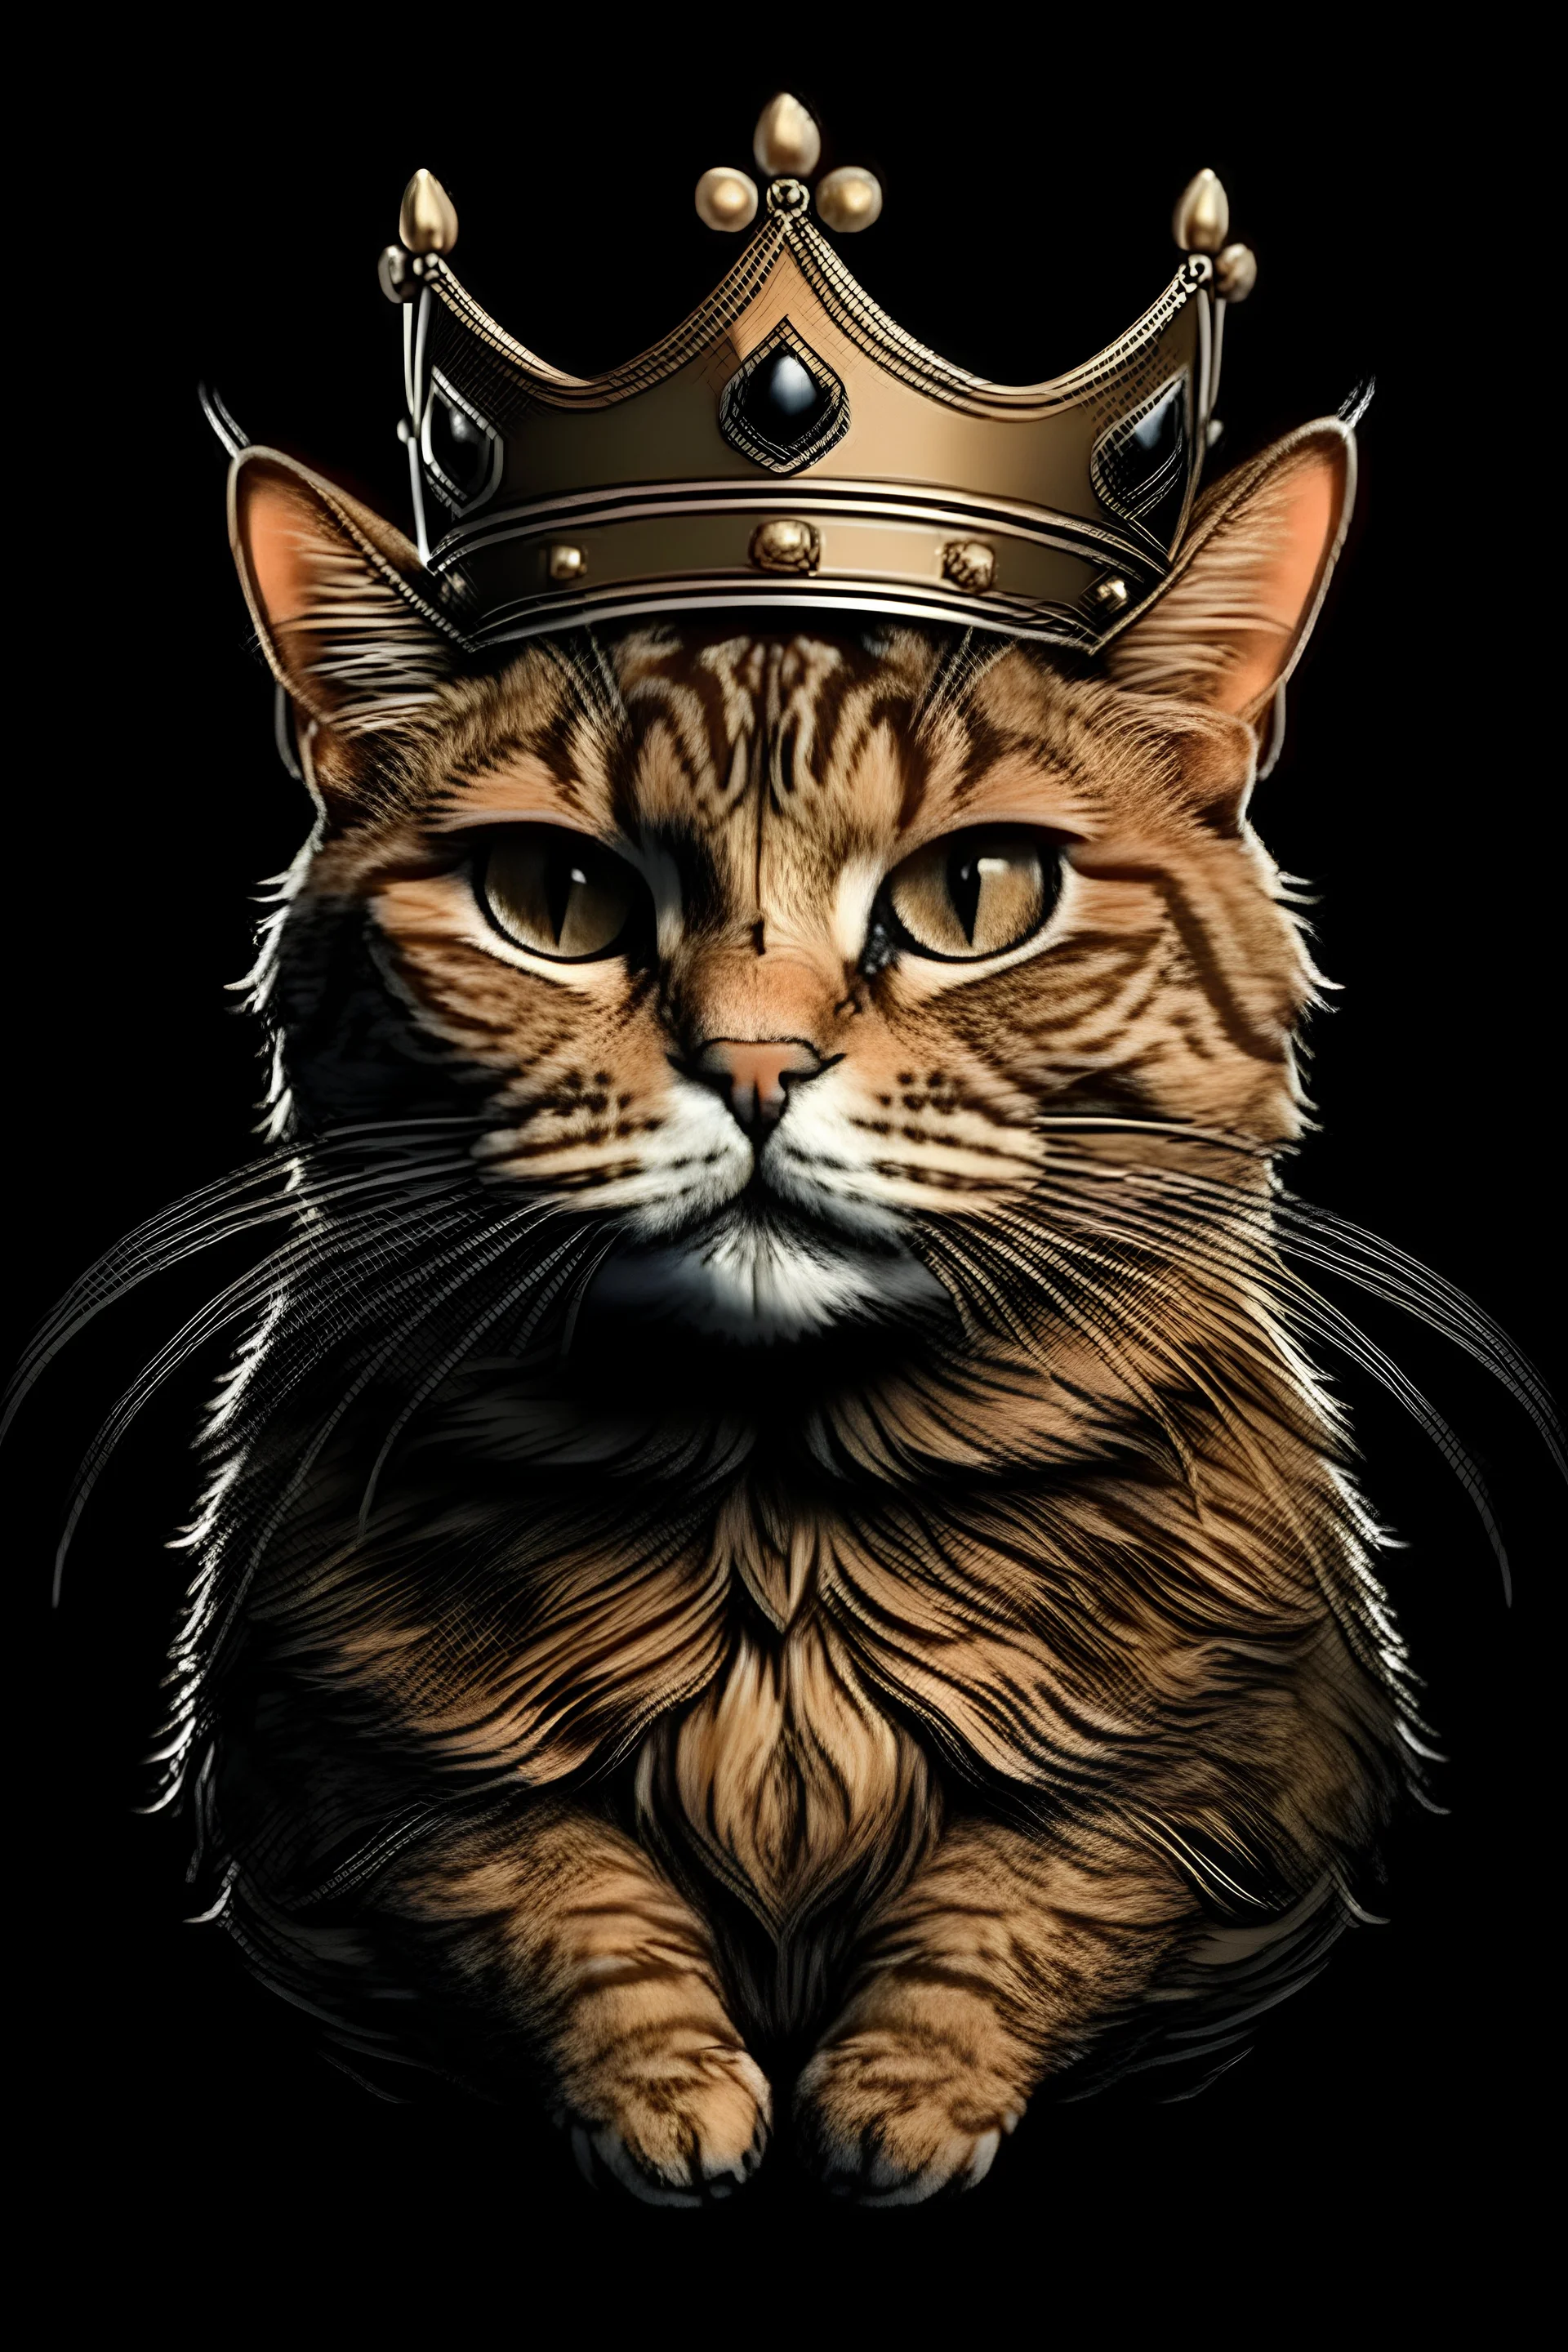 Realistic cat with a crown on the head